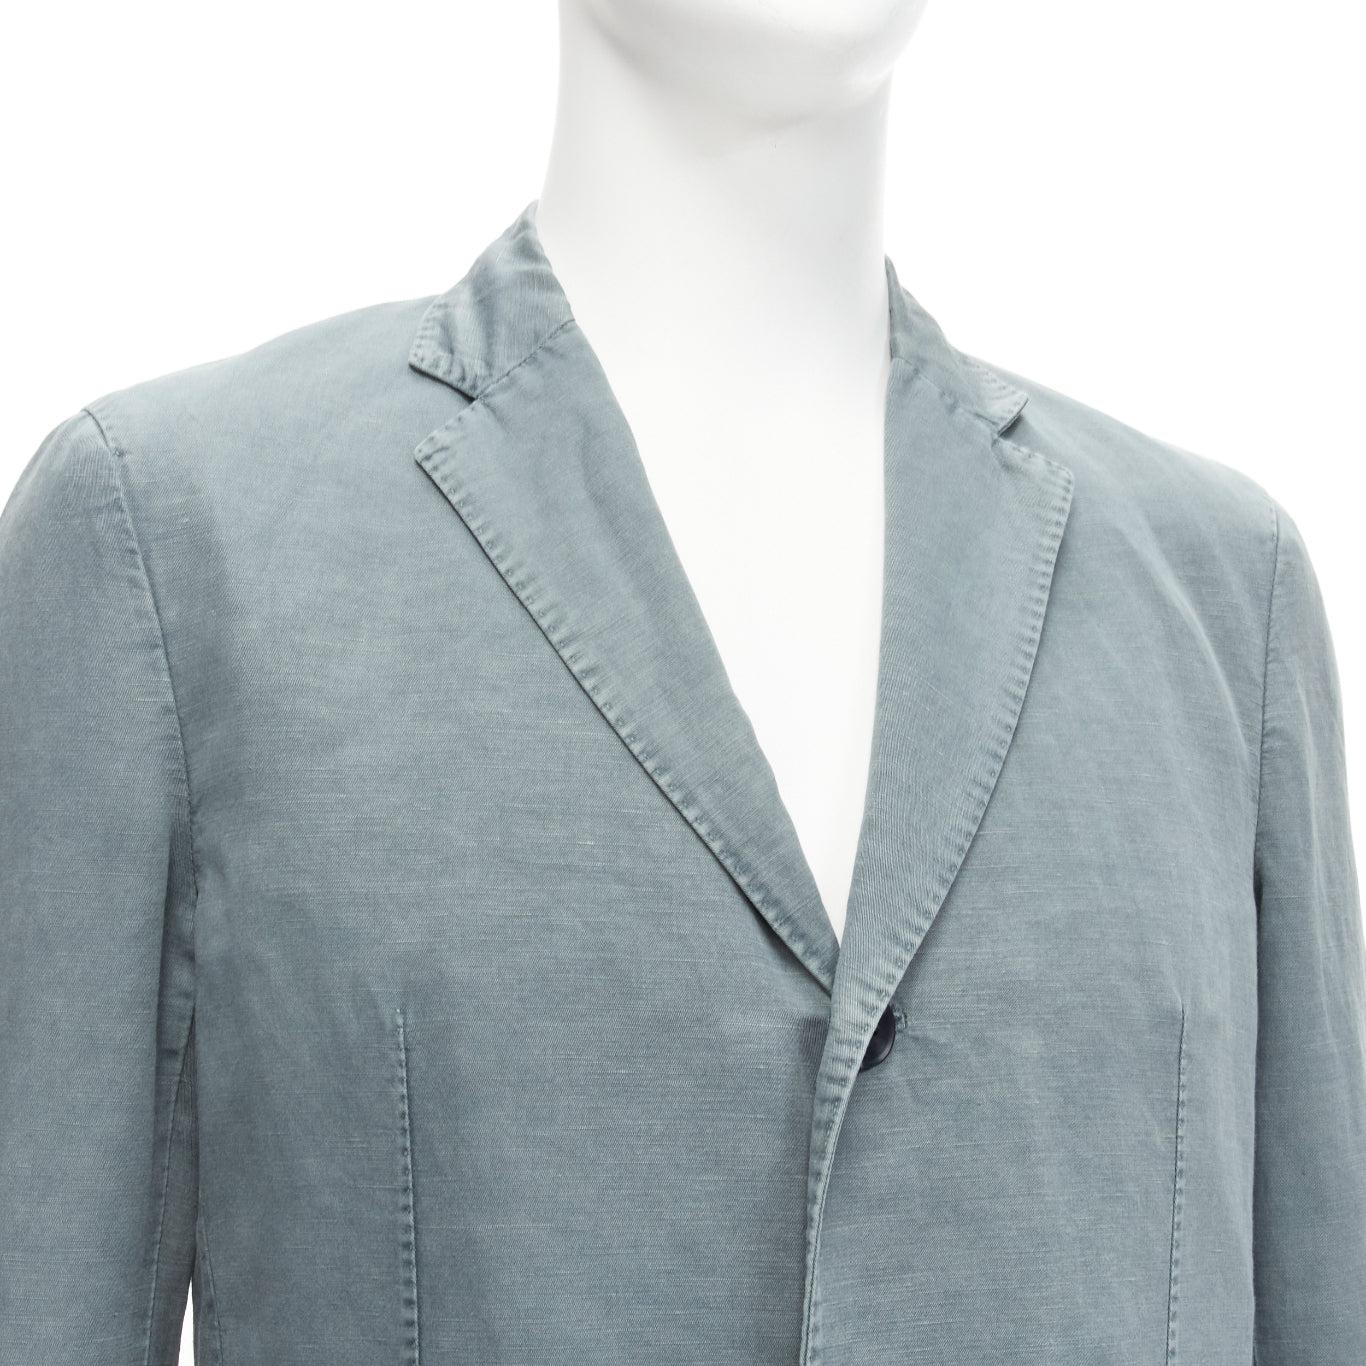 new Z ZEGNA green grey washed linen cotton 3 button pocket fitted blazer L 4